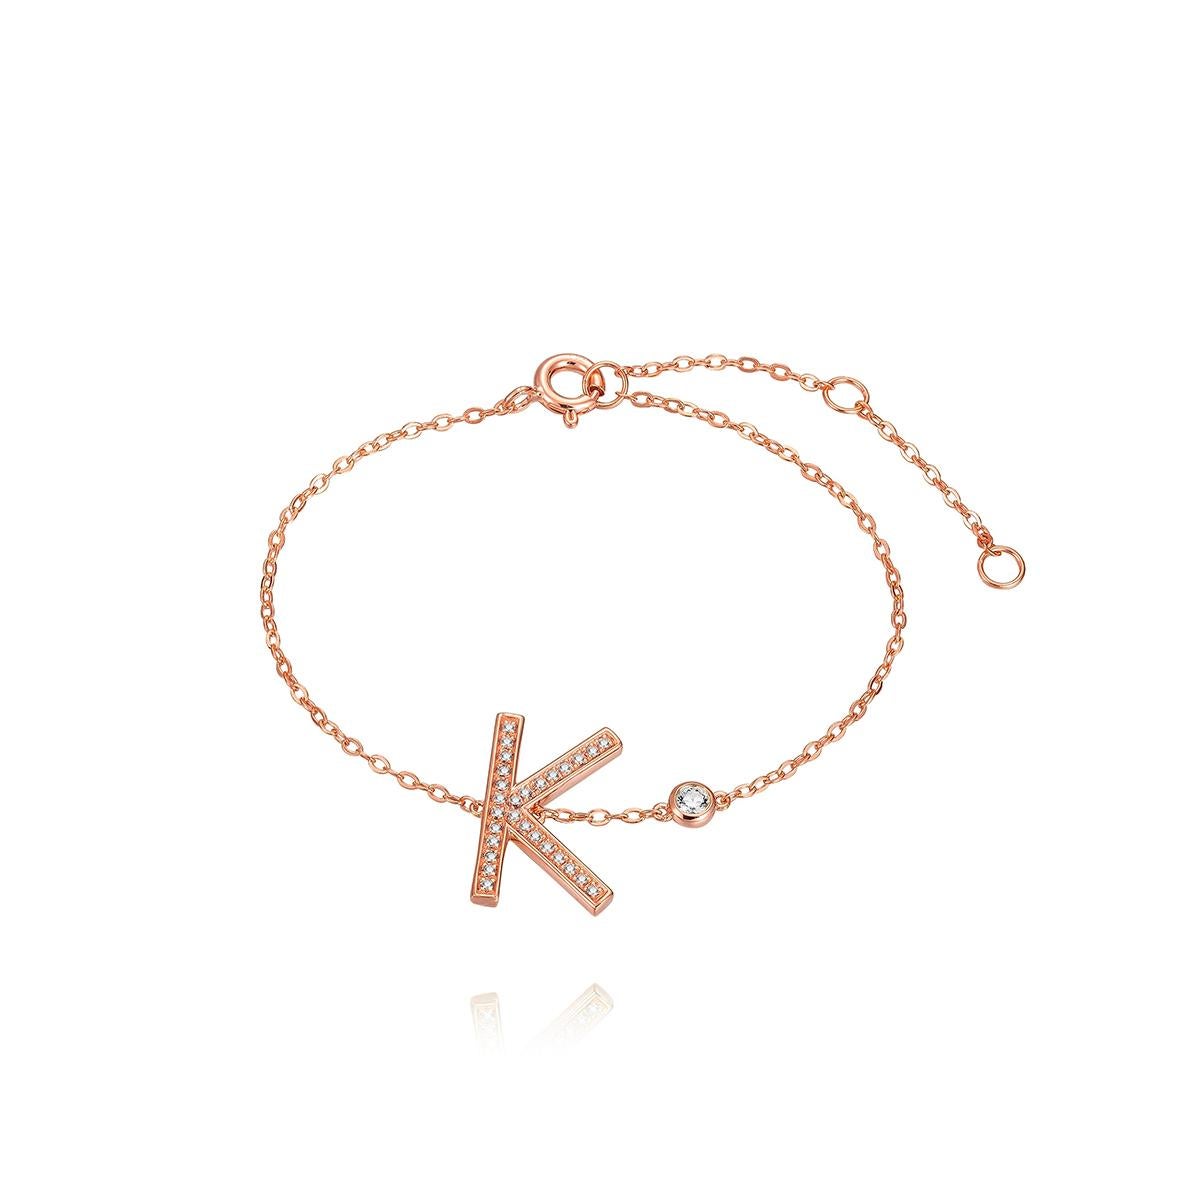 Nothing says YOU more than YOU. You are unique. You are bold.  You're not afraid to share who you are.  This initial bezel chain bracelet is elegantly slimline while sharing a little bit about yourself with others. .925 sterling silver base in 24k